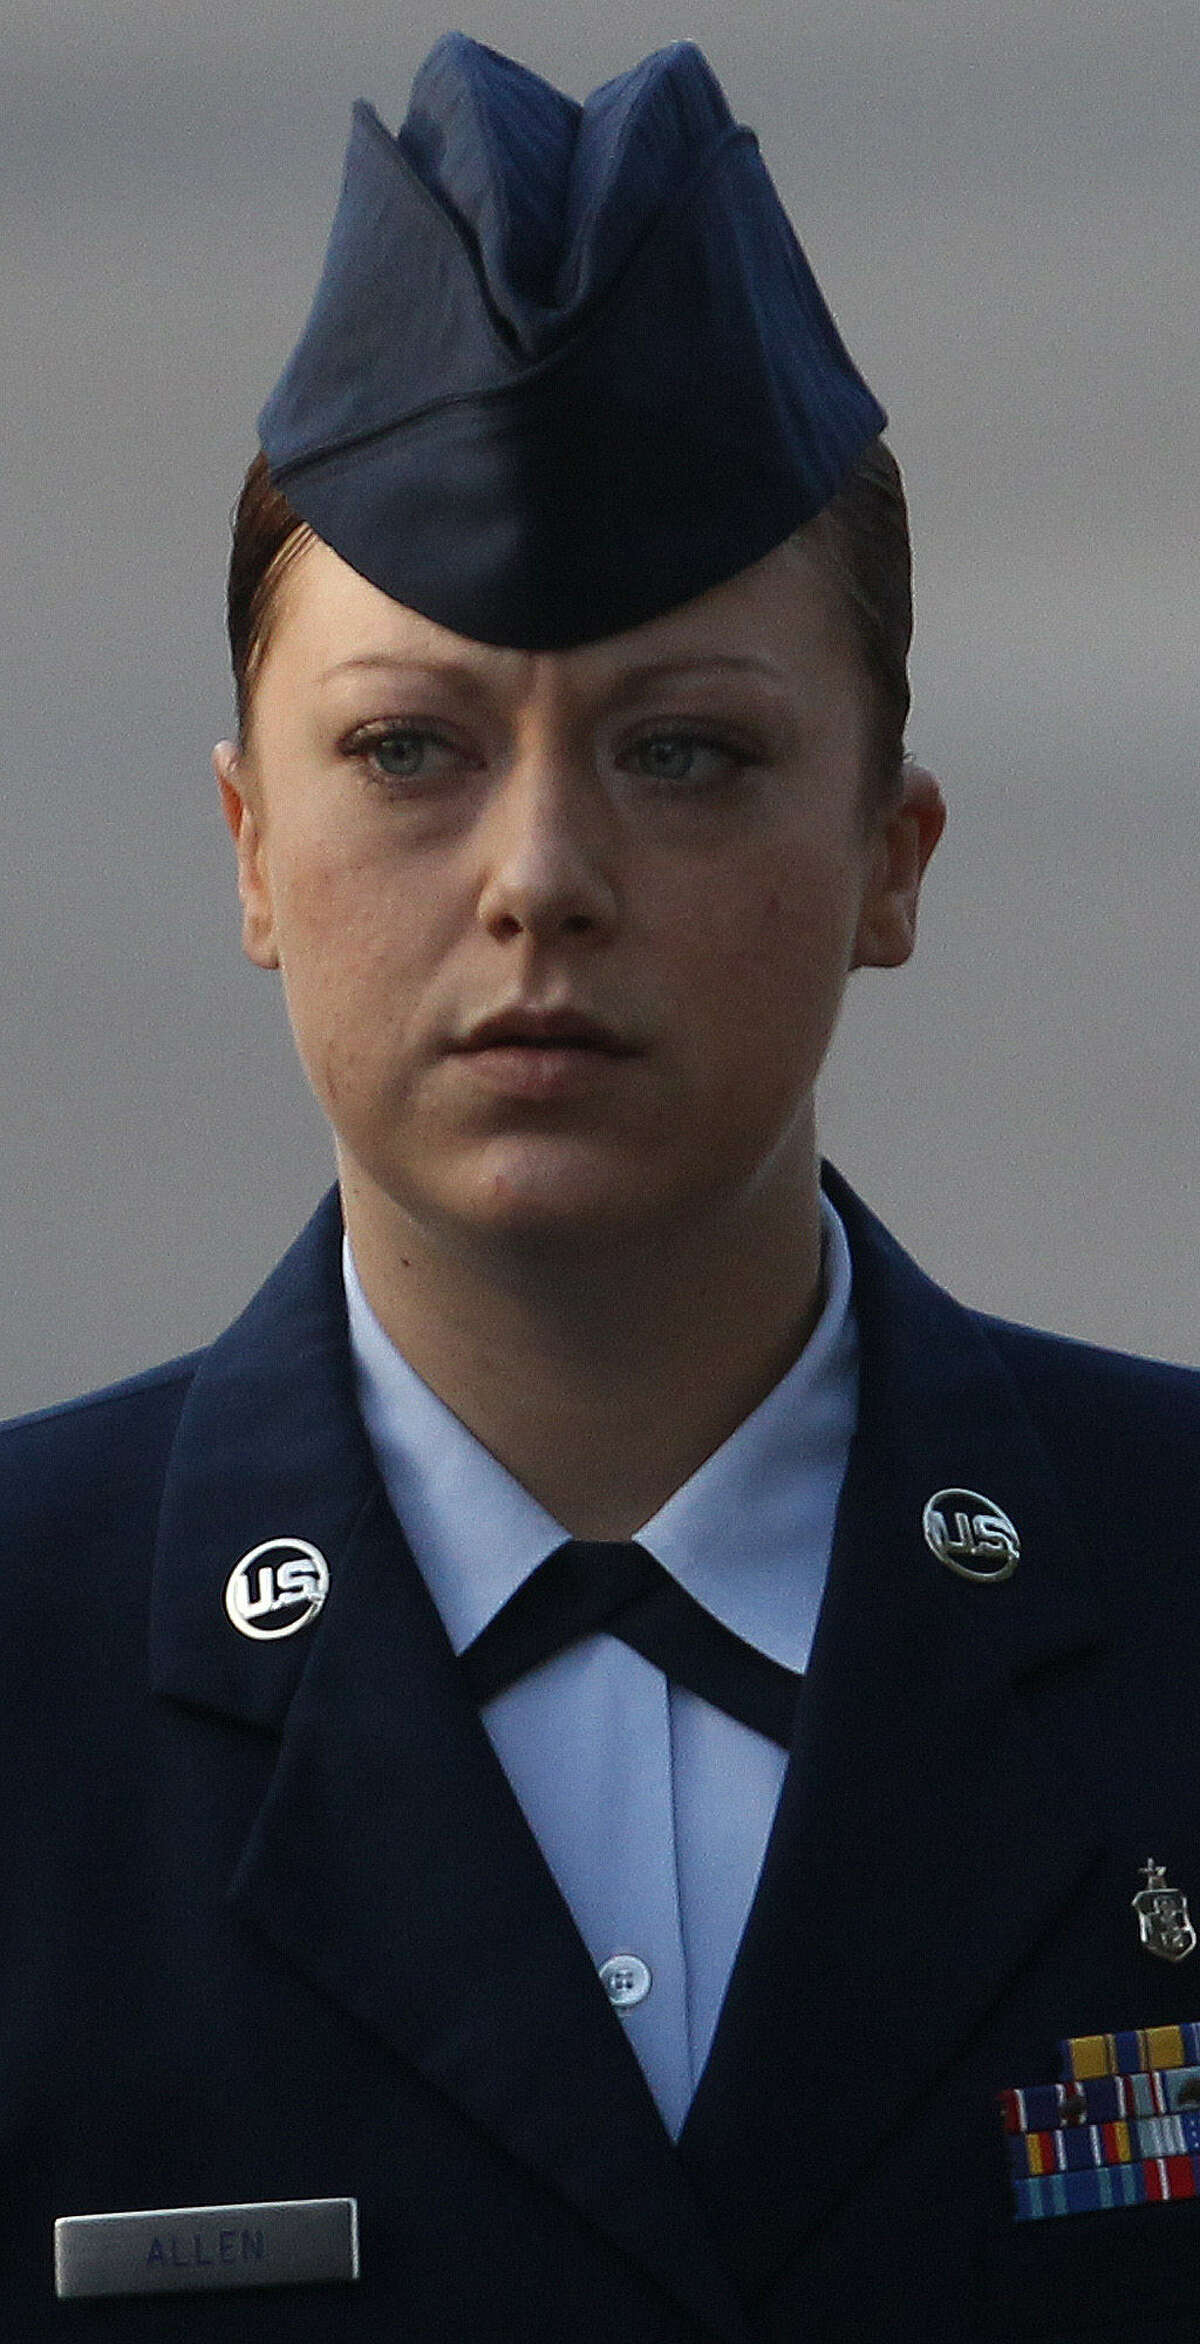 Staff Sgt. Emily Allen got 30 days' hard labor and was busted to airman first class.